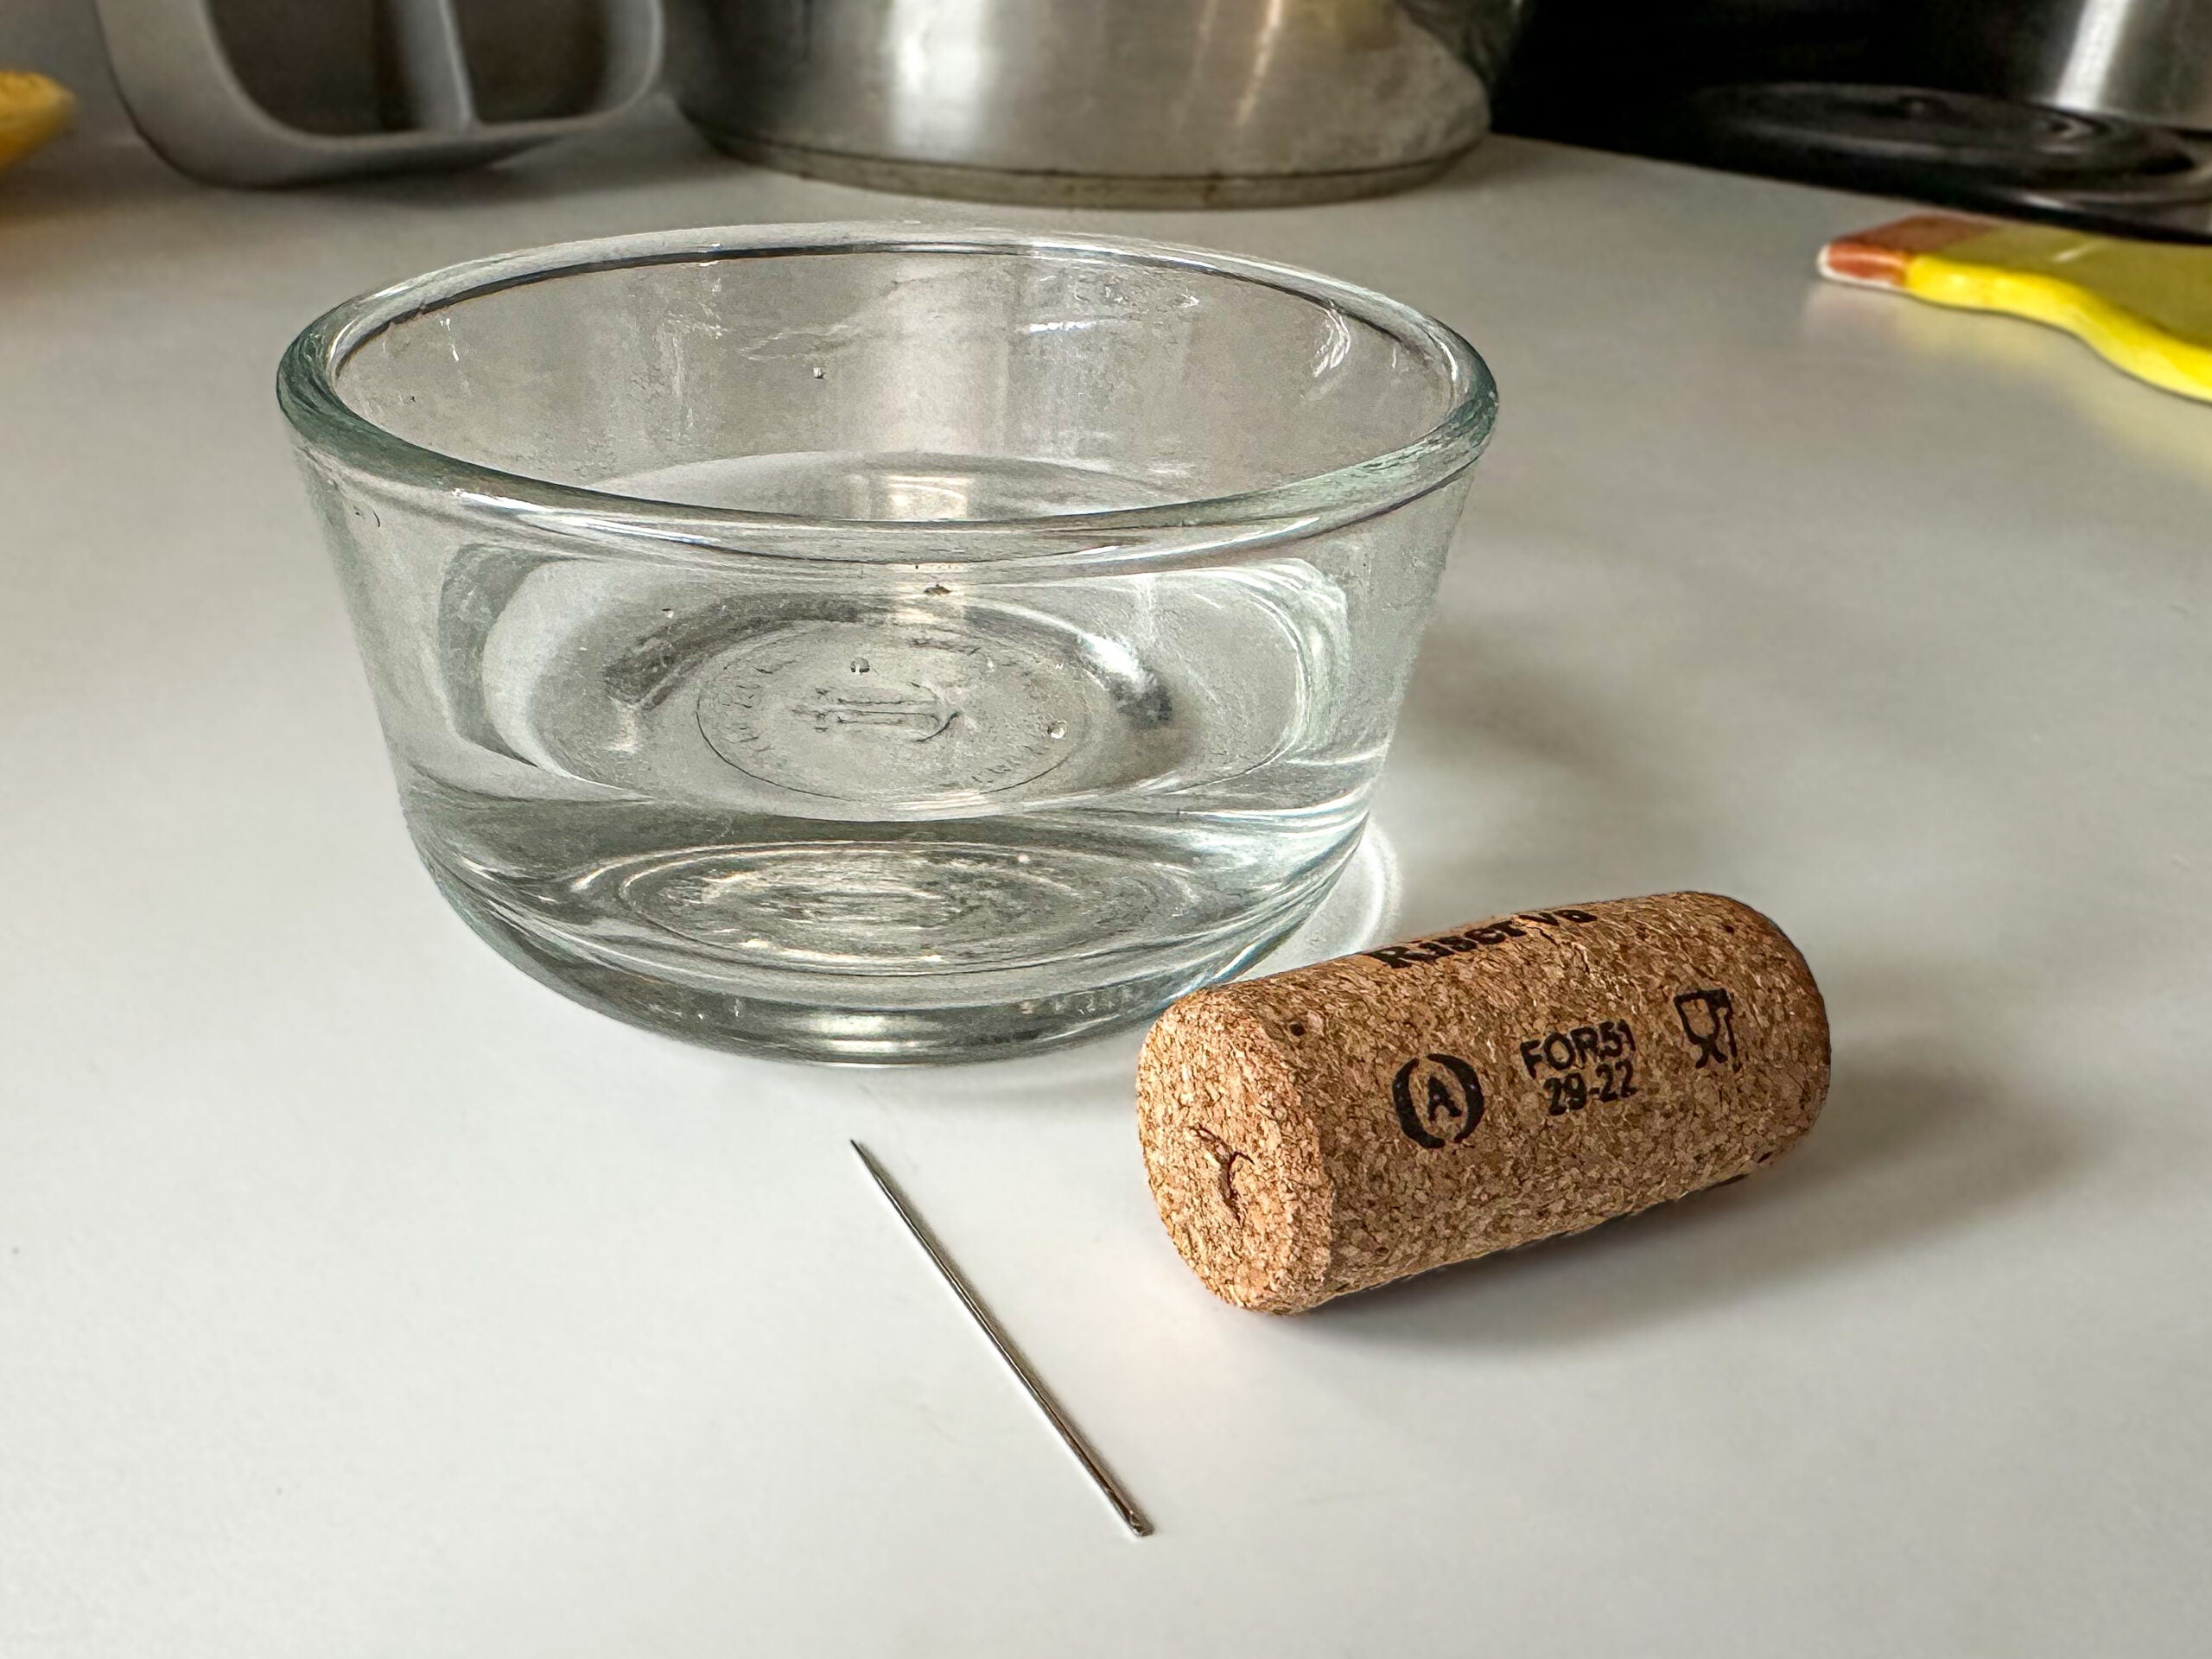 making a compass with a needle and cork